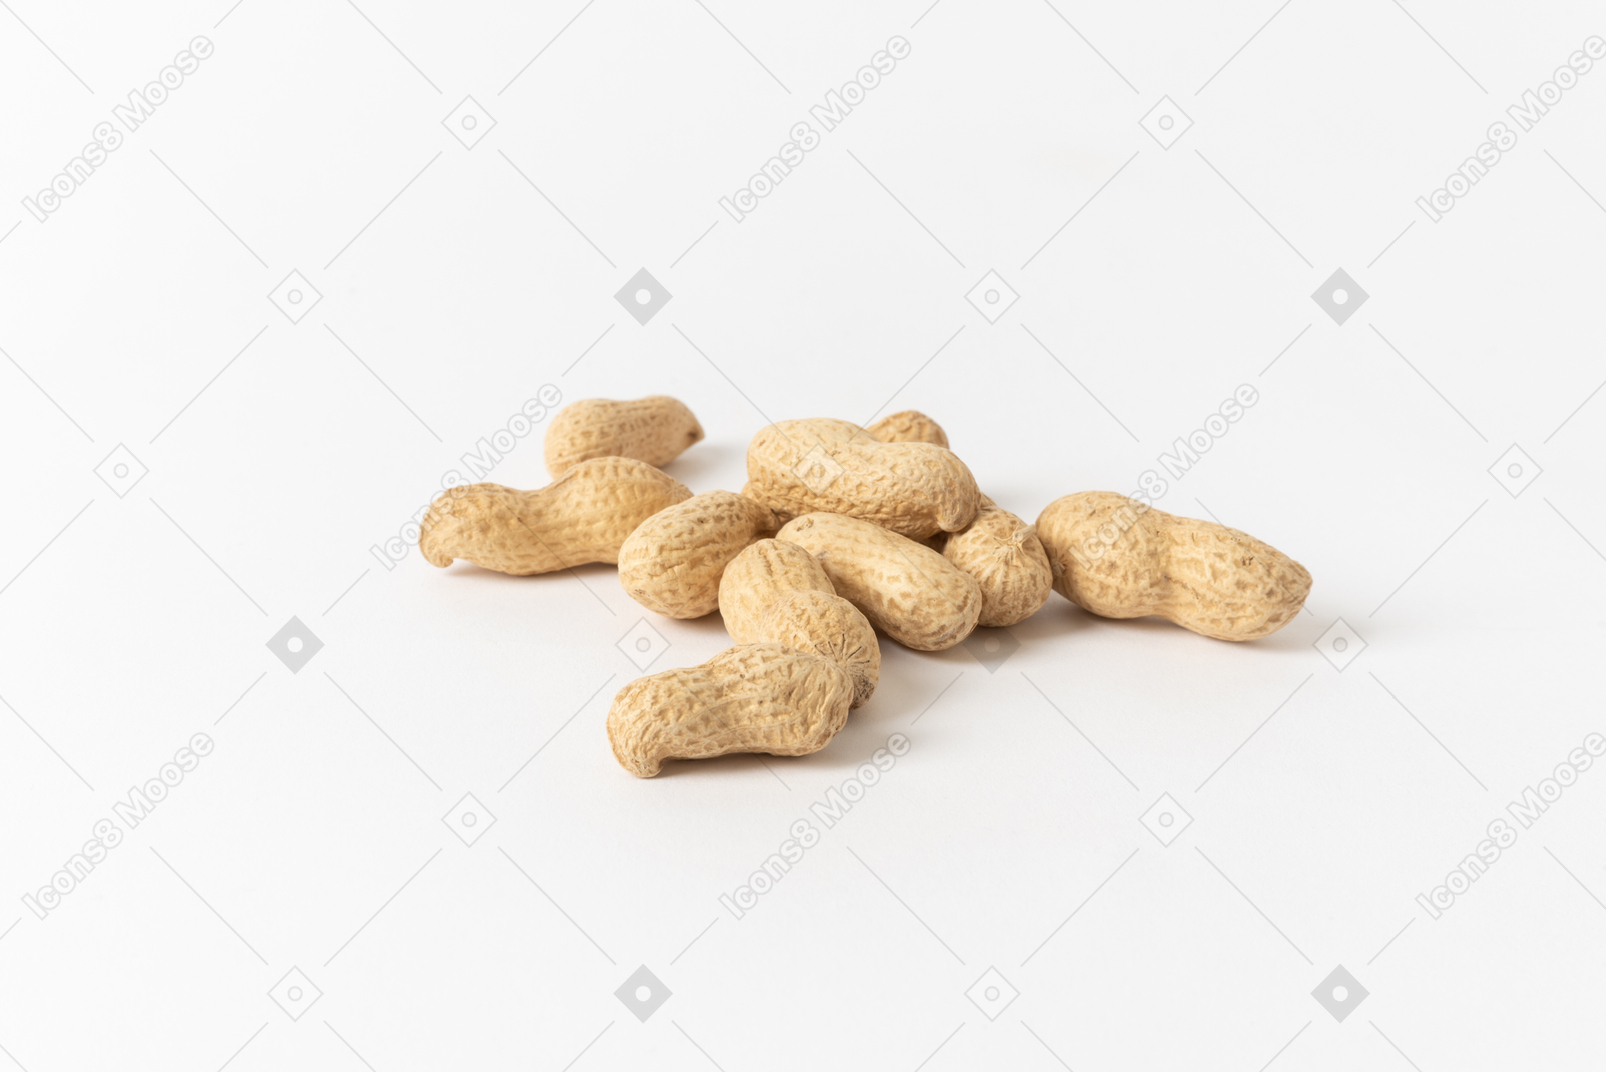 Roasted and salted peanuts are a classic snack